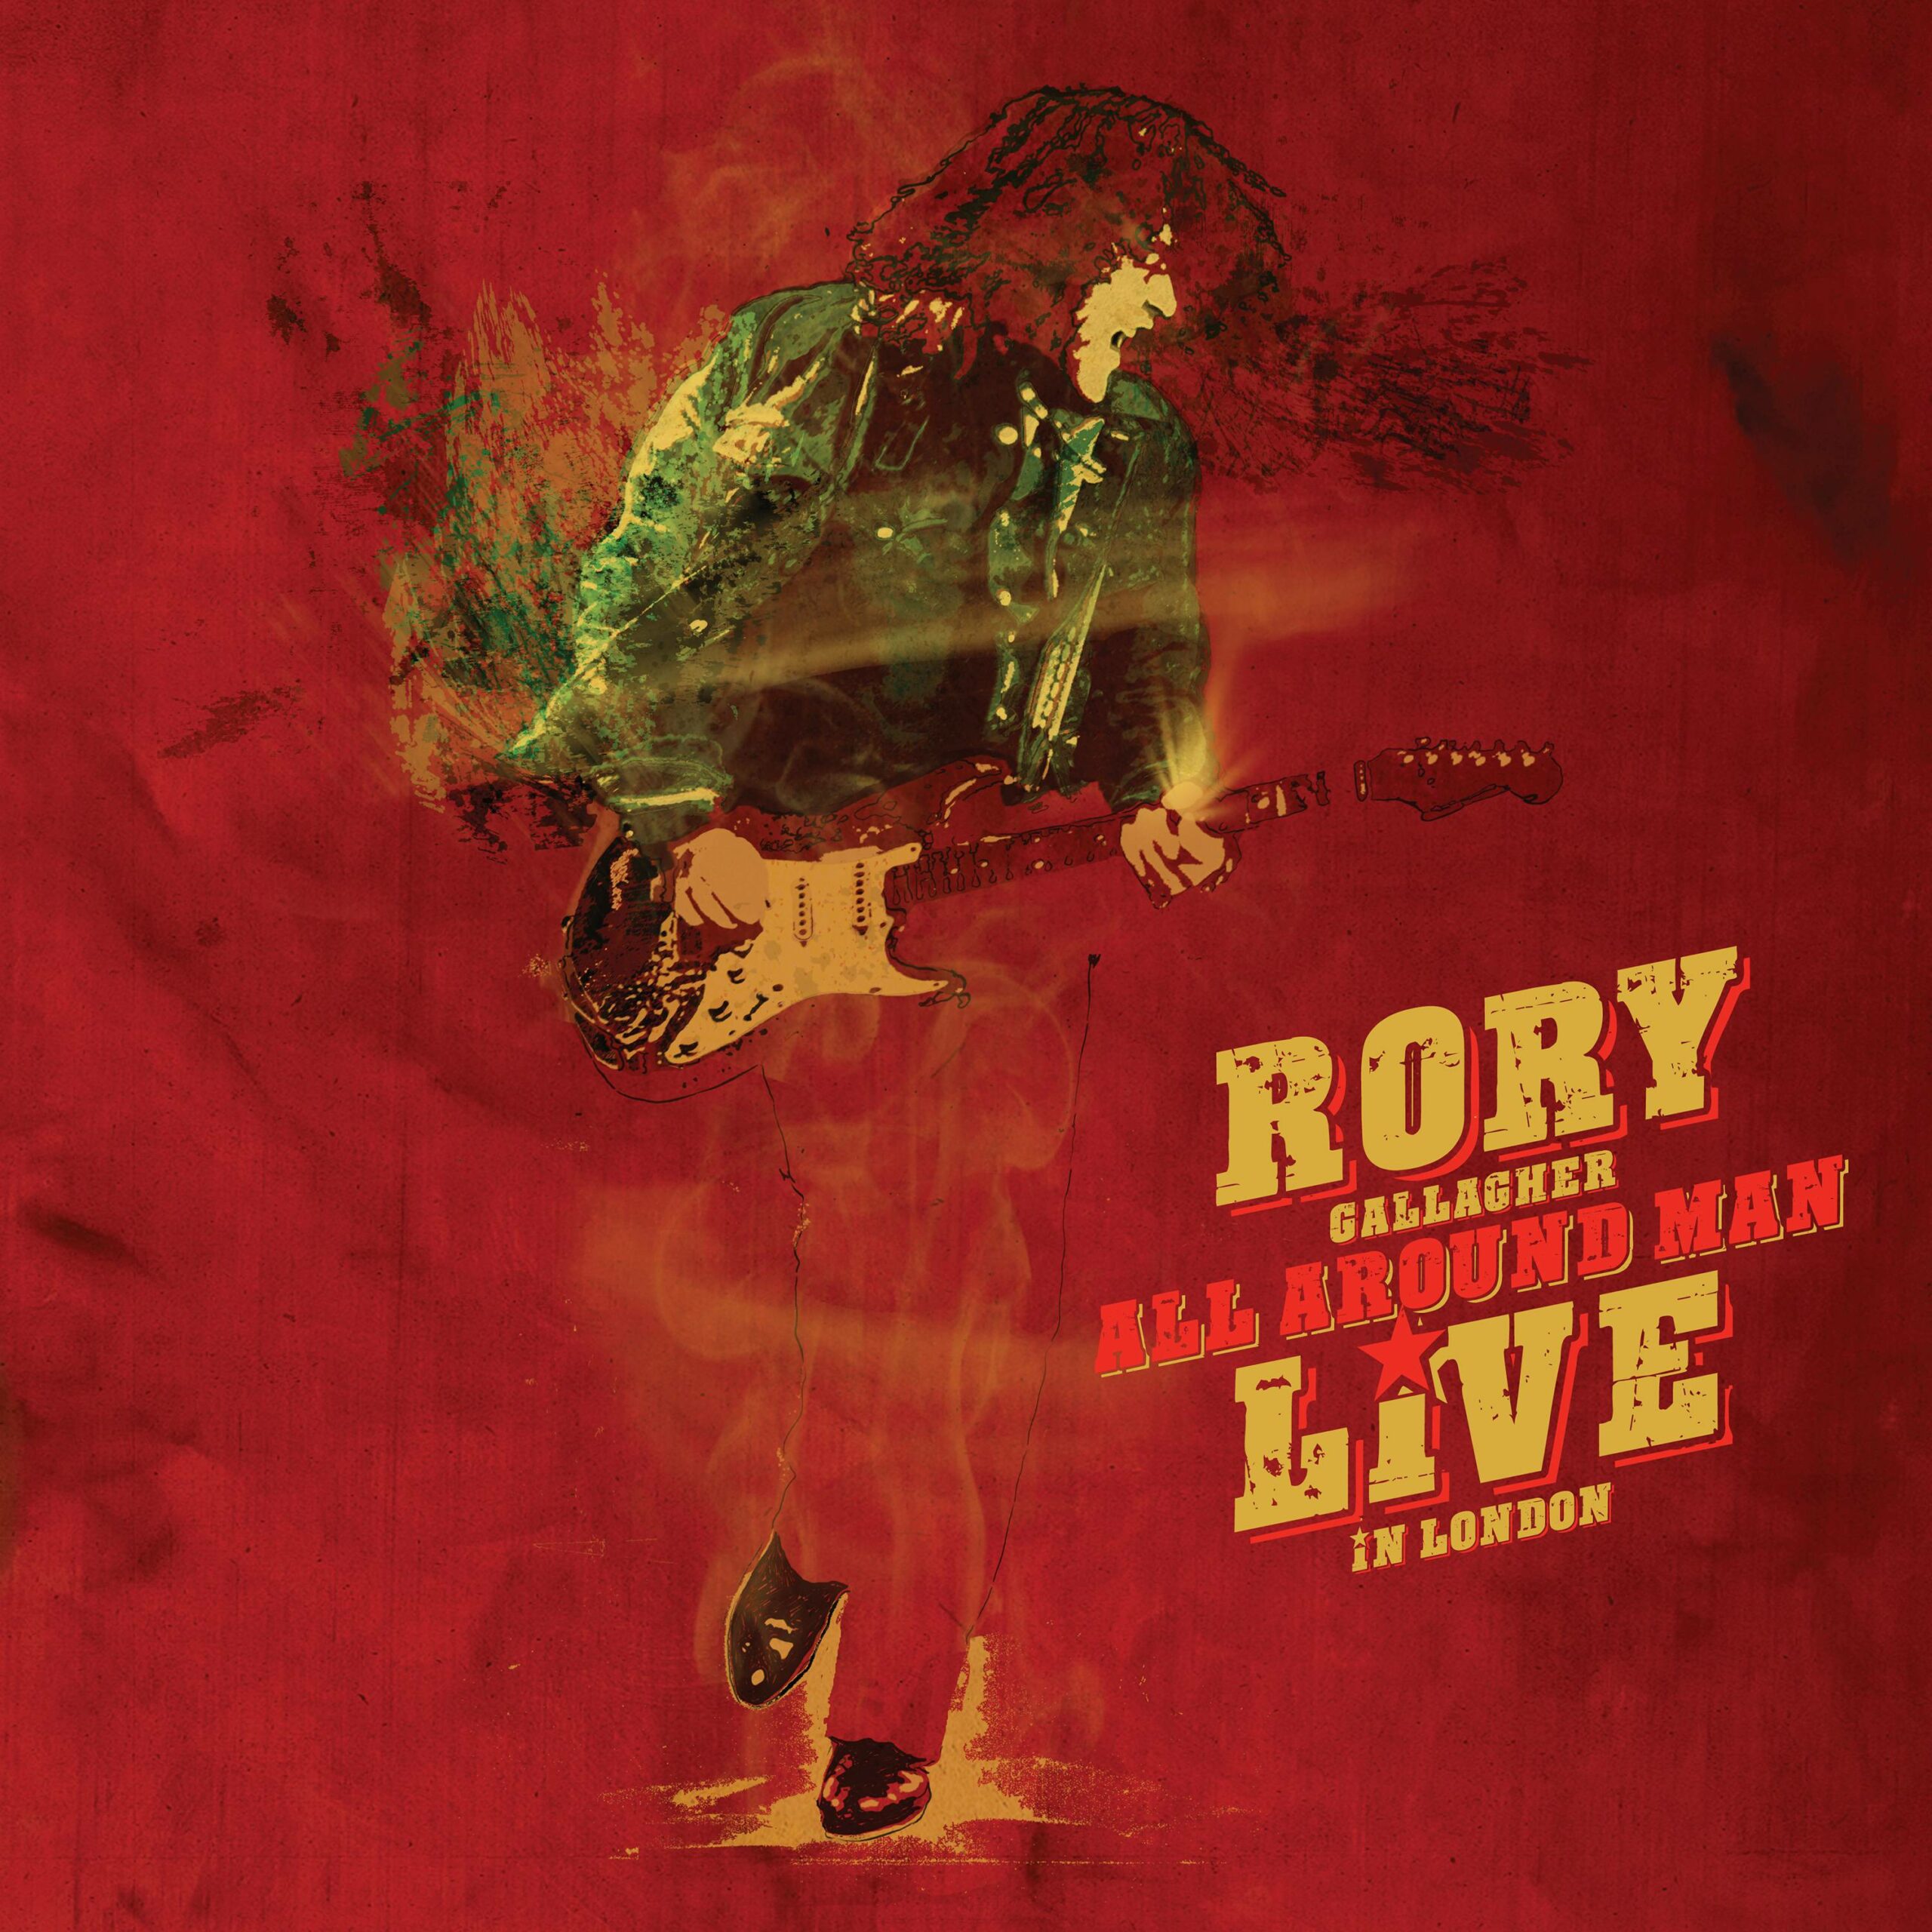 Rory Gallagher (IRE) – All Around Man: Live In London